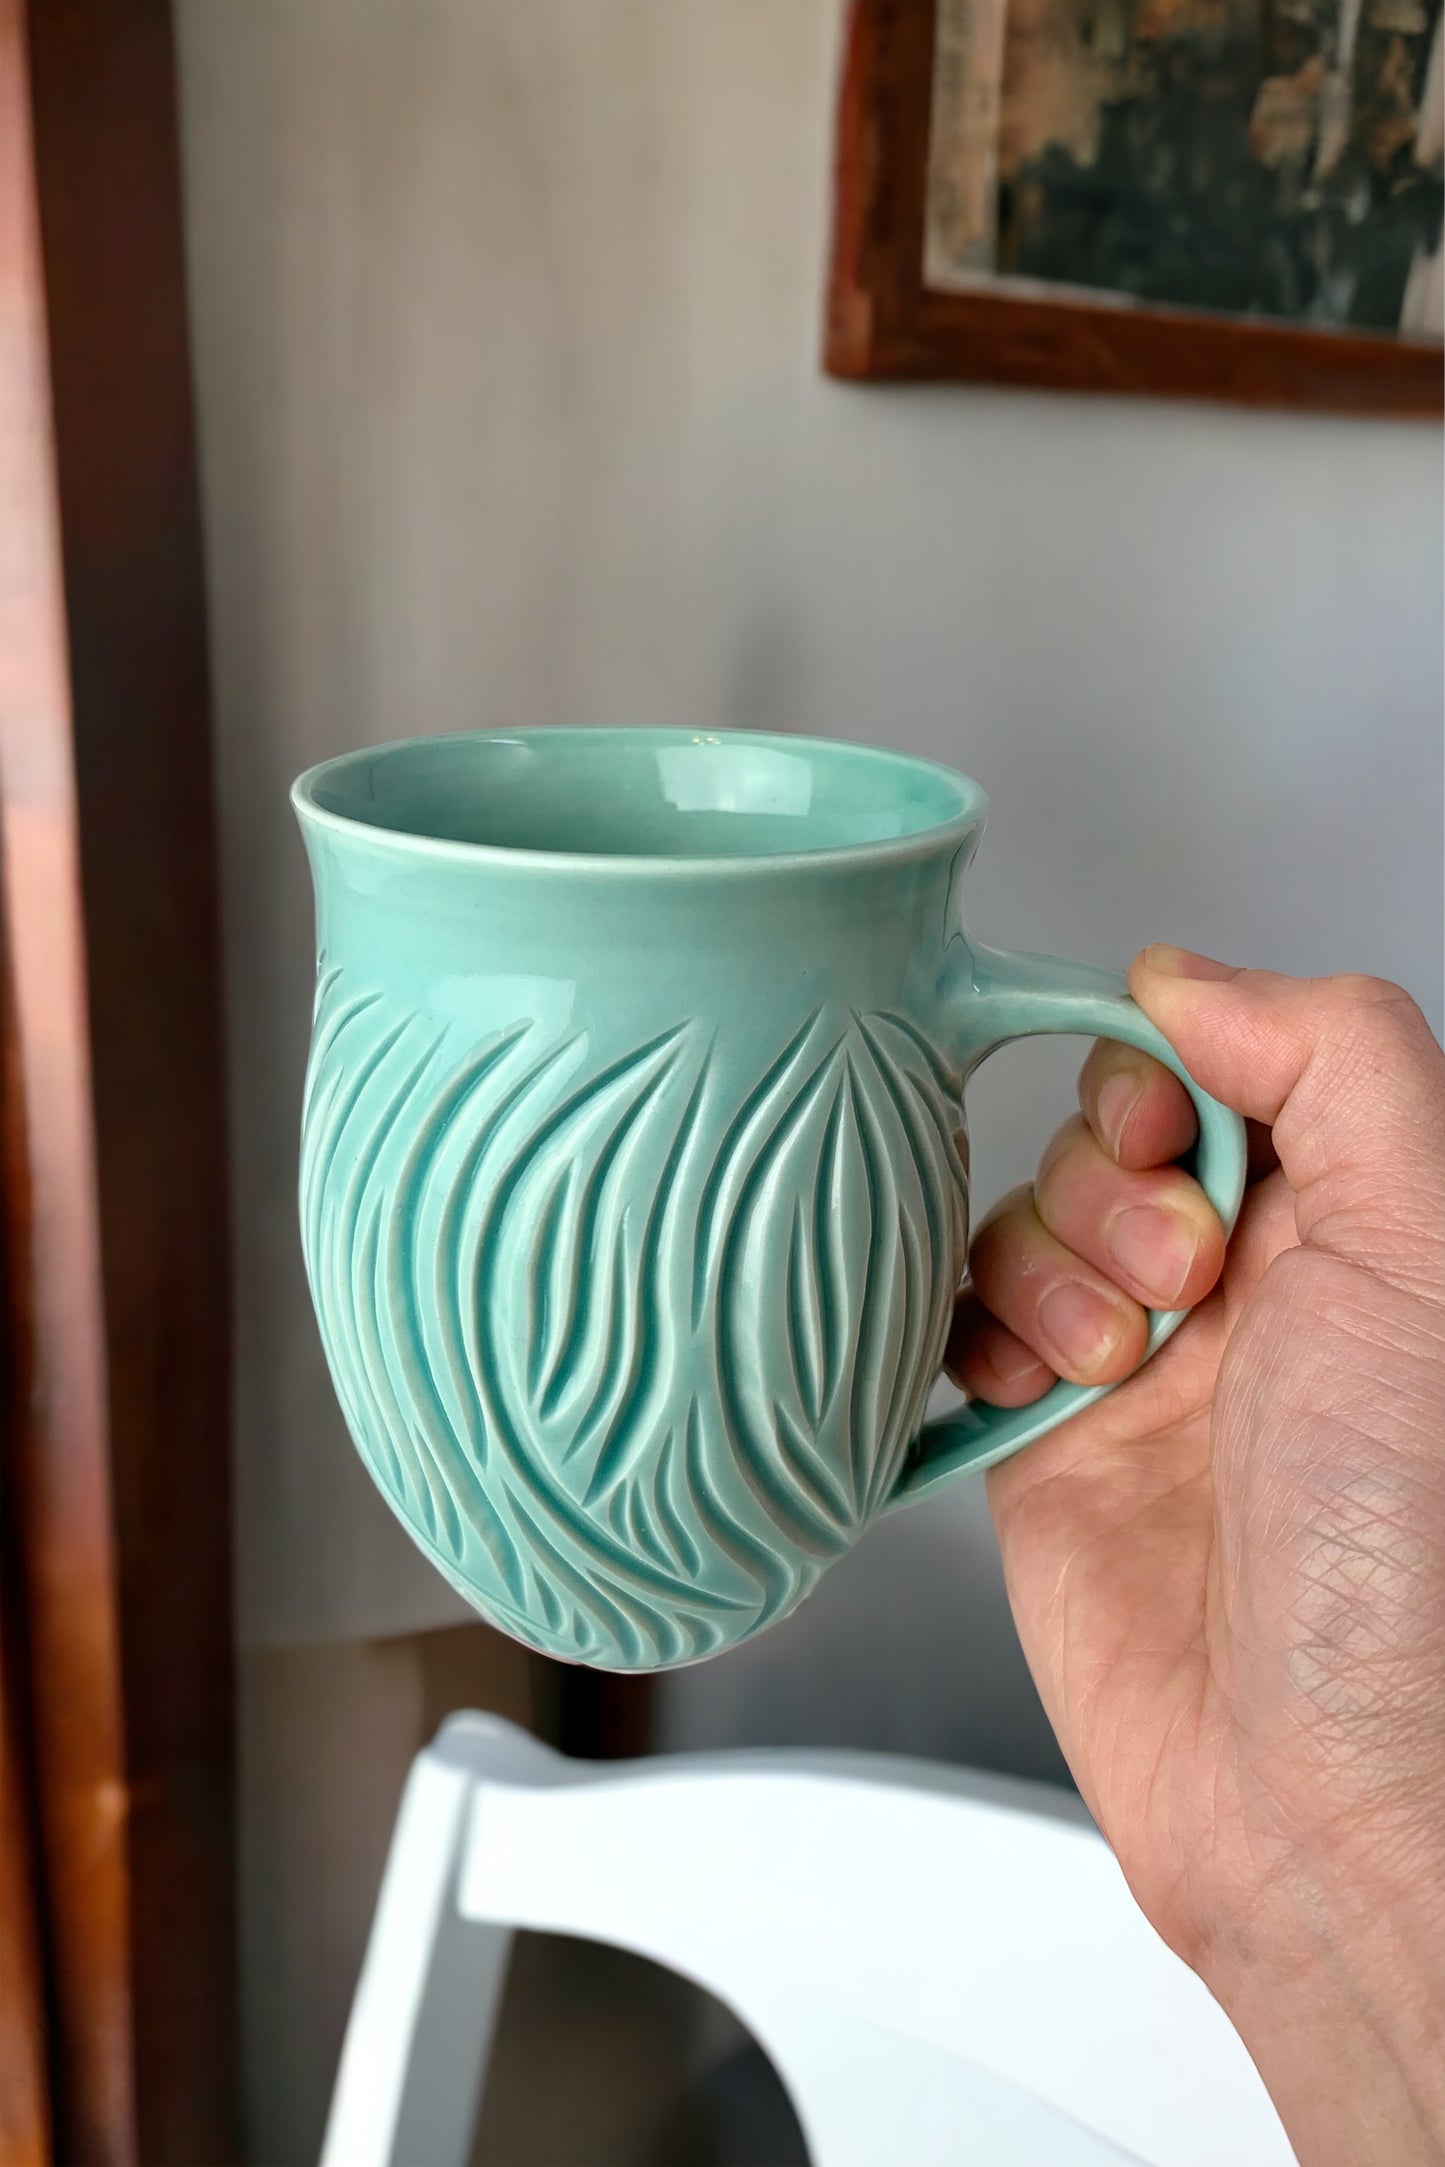 Large porcelain mug with abstract carvings in turquoise